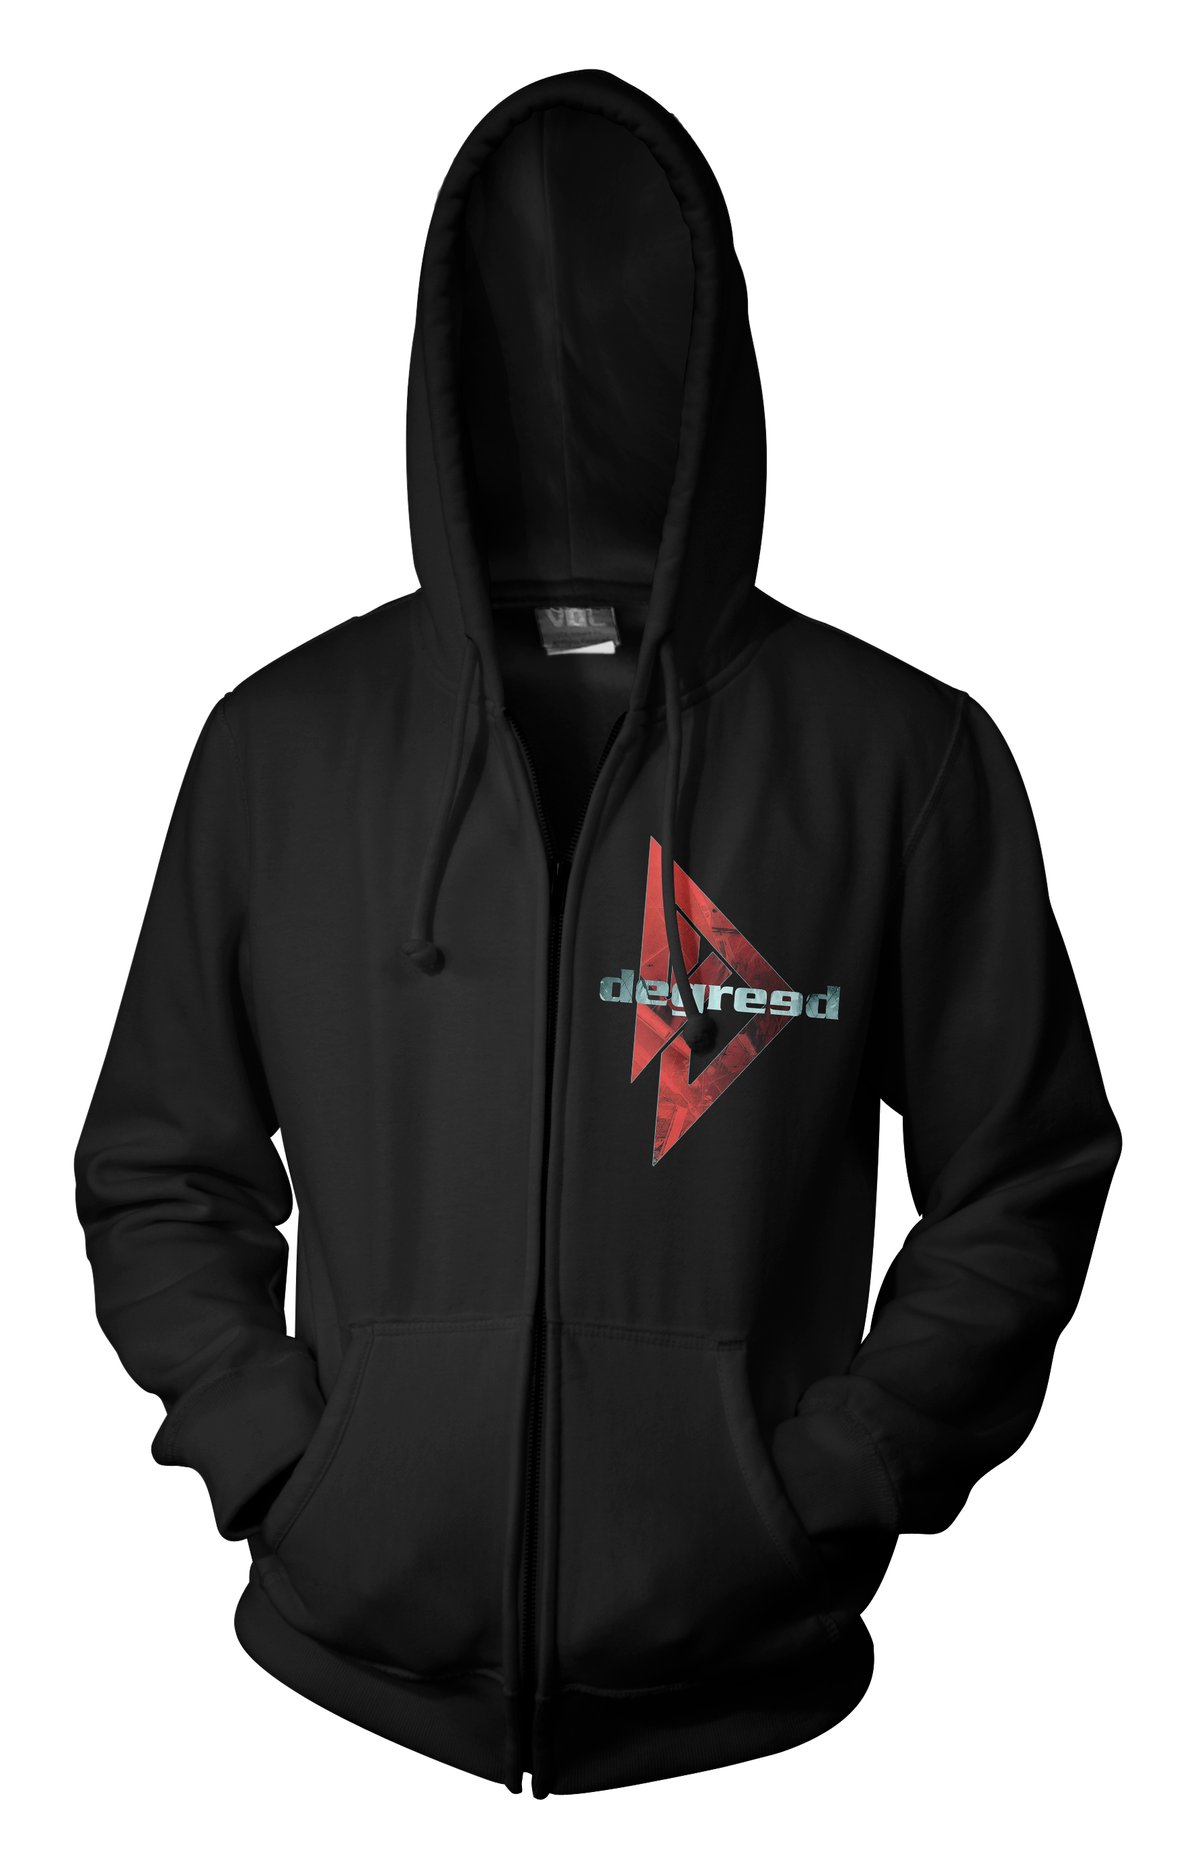 Image of "Are You Ready" Zipper Hoodie